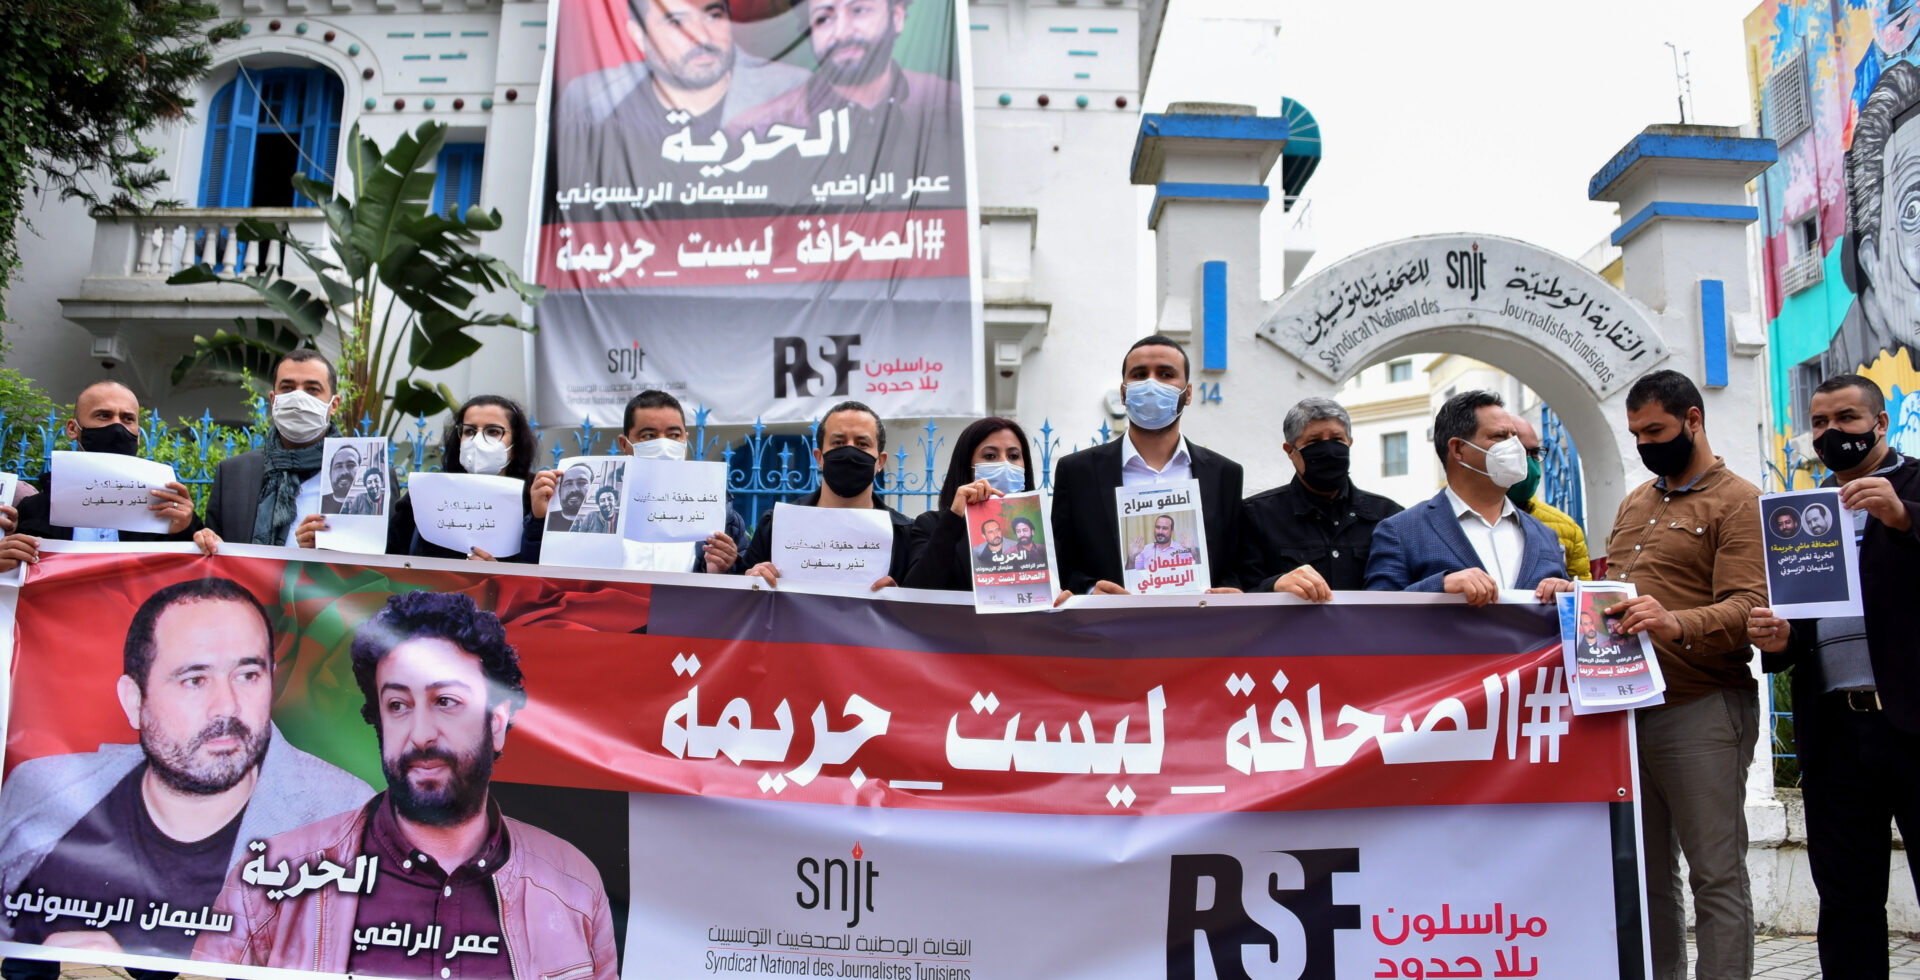 Protesters in Morocco hold a banner proclaiming that journalism is not a crime and demanding freedom for journalists Omar Radi and Suleiman Raissouni